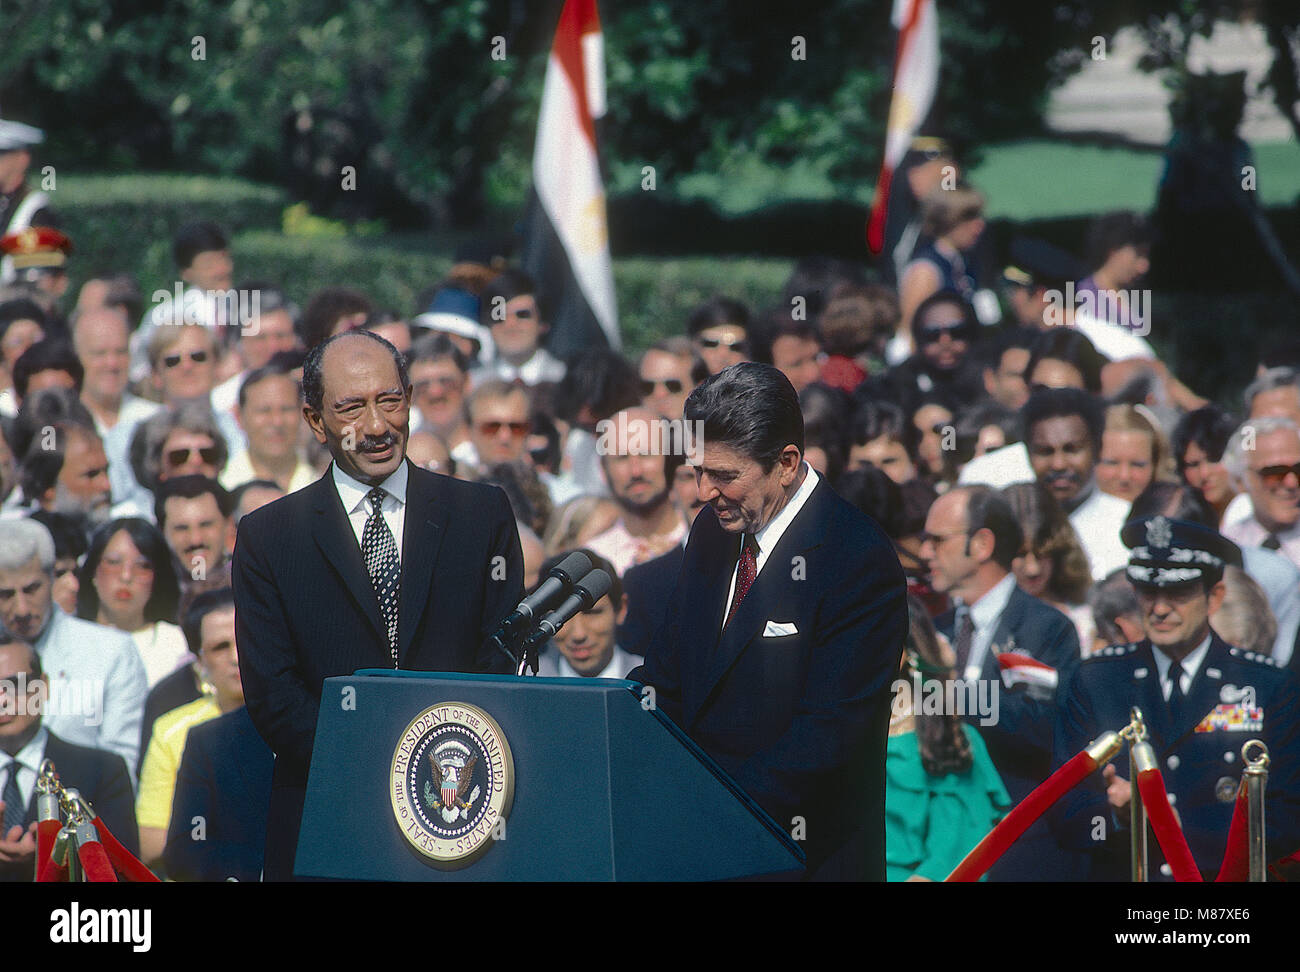 Washington, DC., USA, August 5, 1981  President Ronald Reagan and Egyptian President Anwar  el-Sadat during the official welcoming ceremony on the South Lawn. Credit: Mark Reinstein/MediaPunch Stock Photo